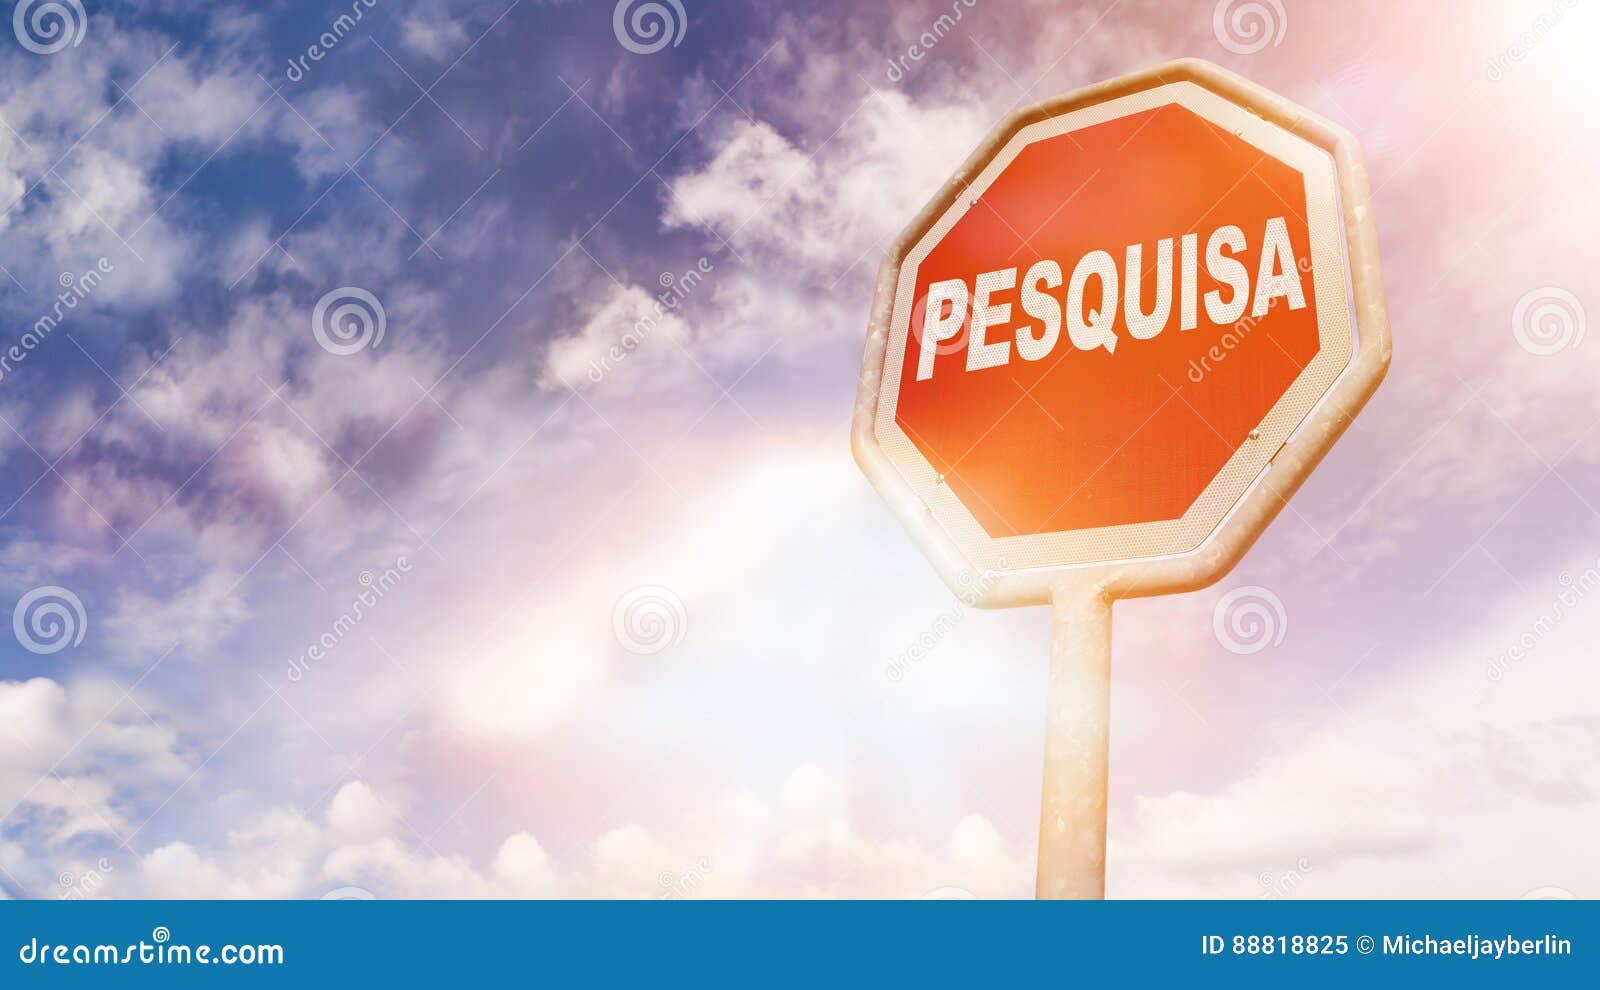 pesquisa, portuguese text for search text on red traffic sign